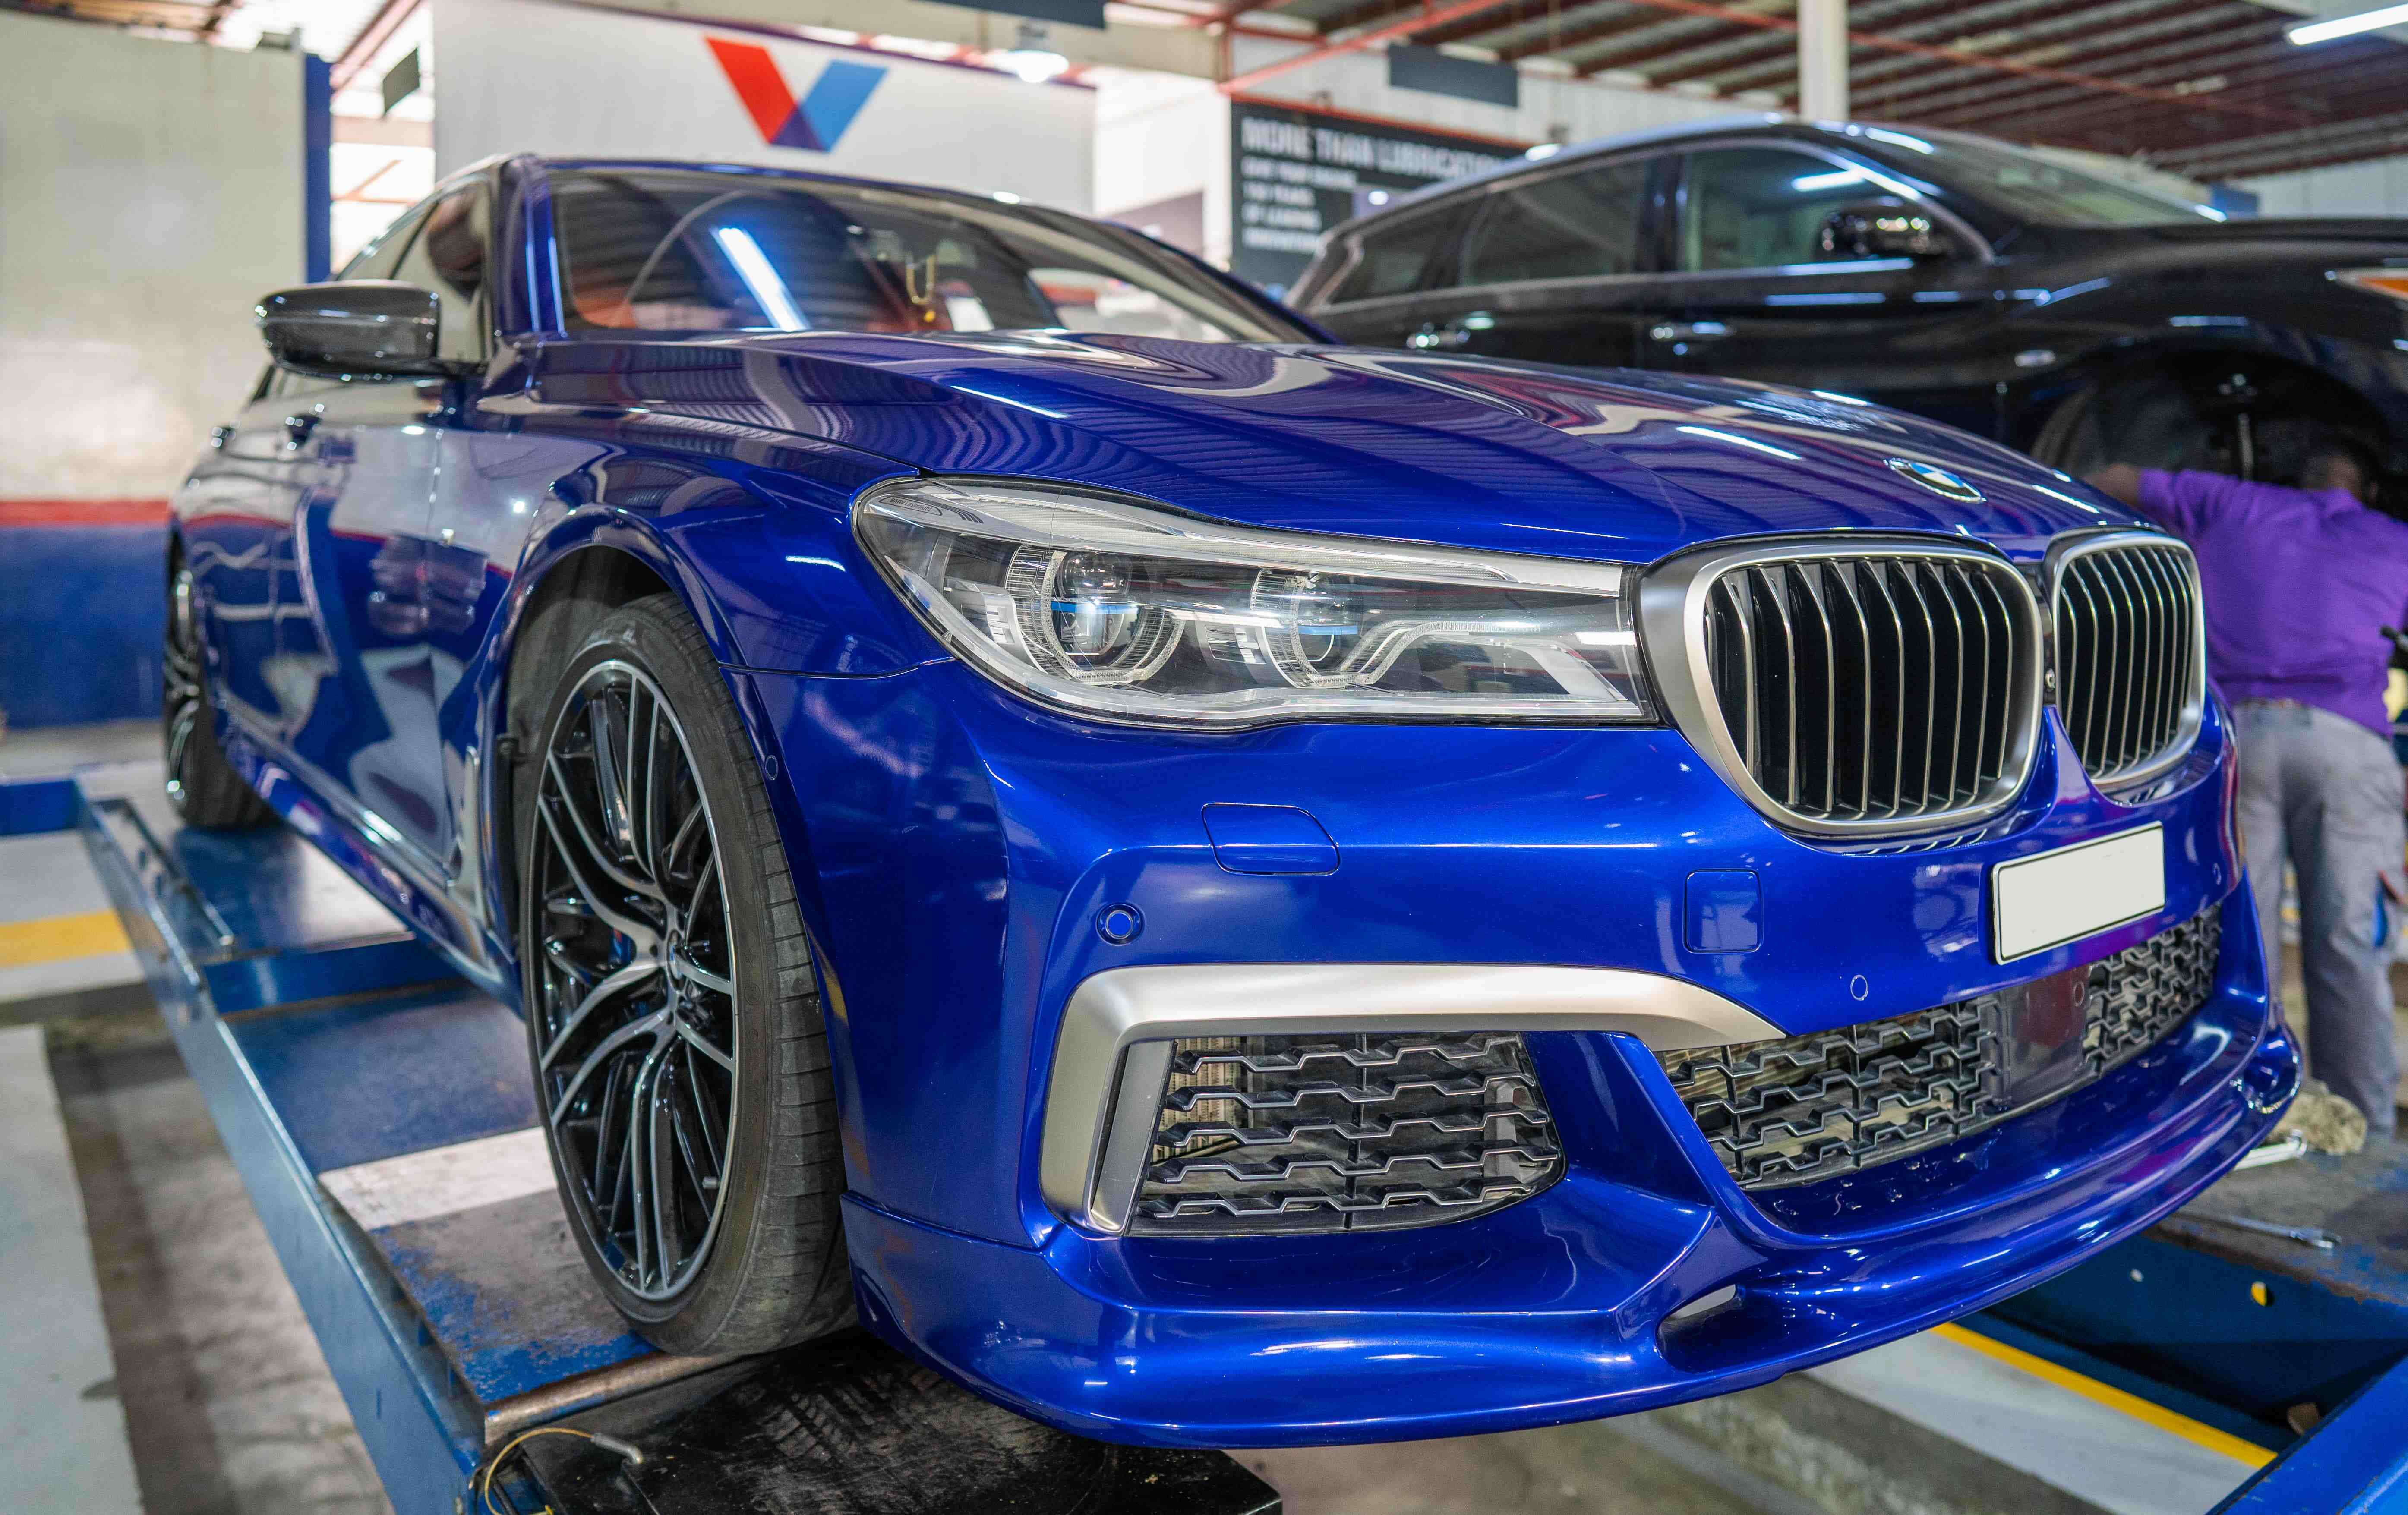 Preserving Perfection: Why Your BMW Deserves Premium Car Servicing